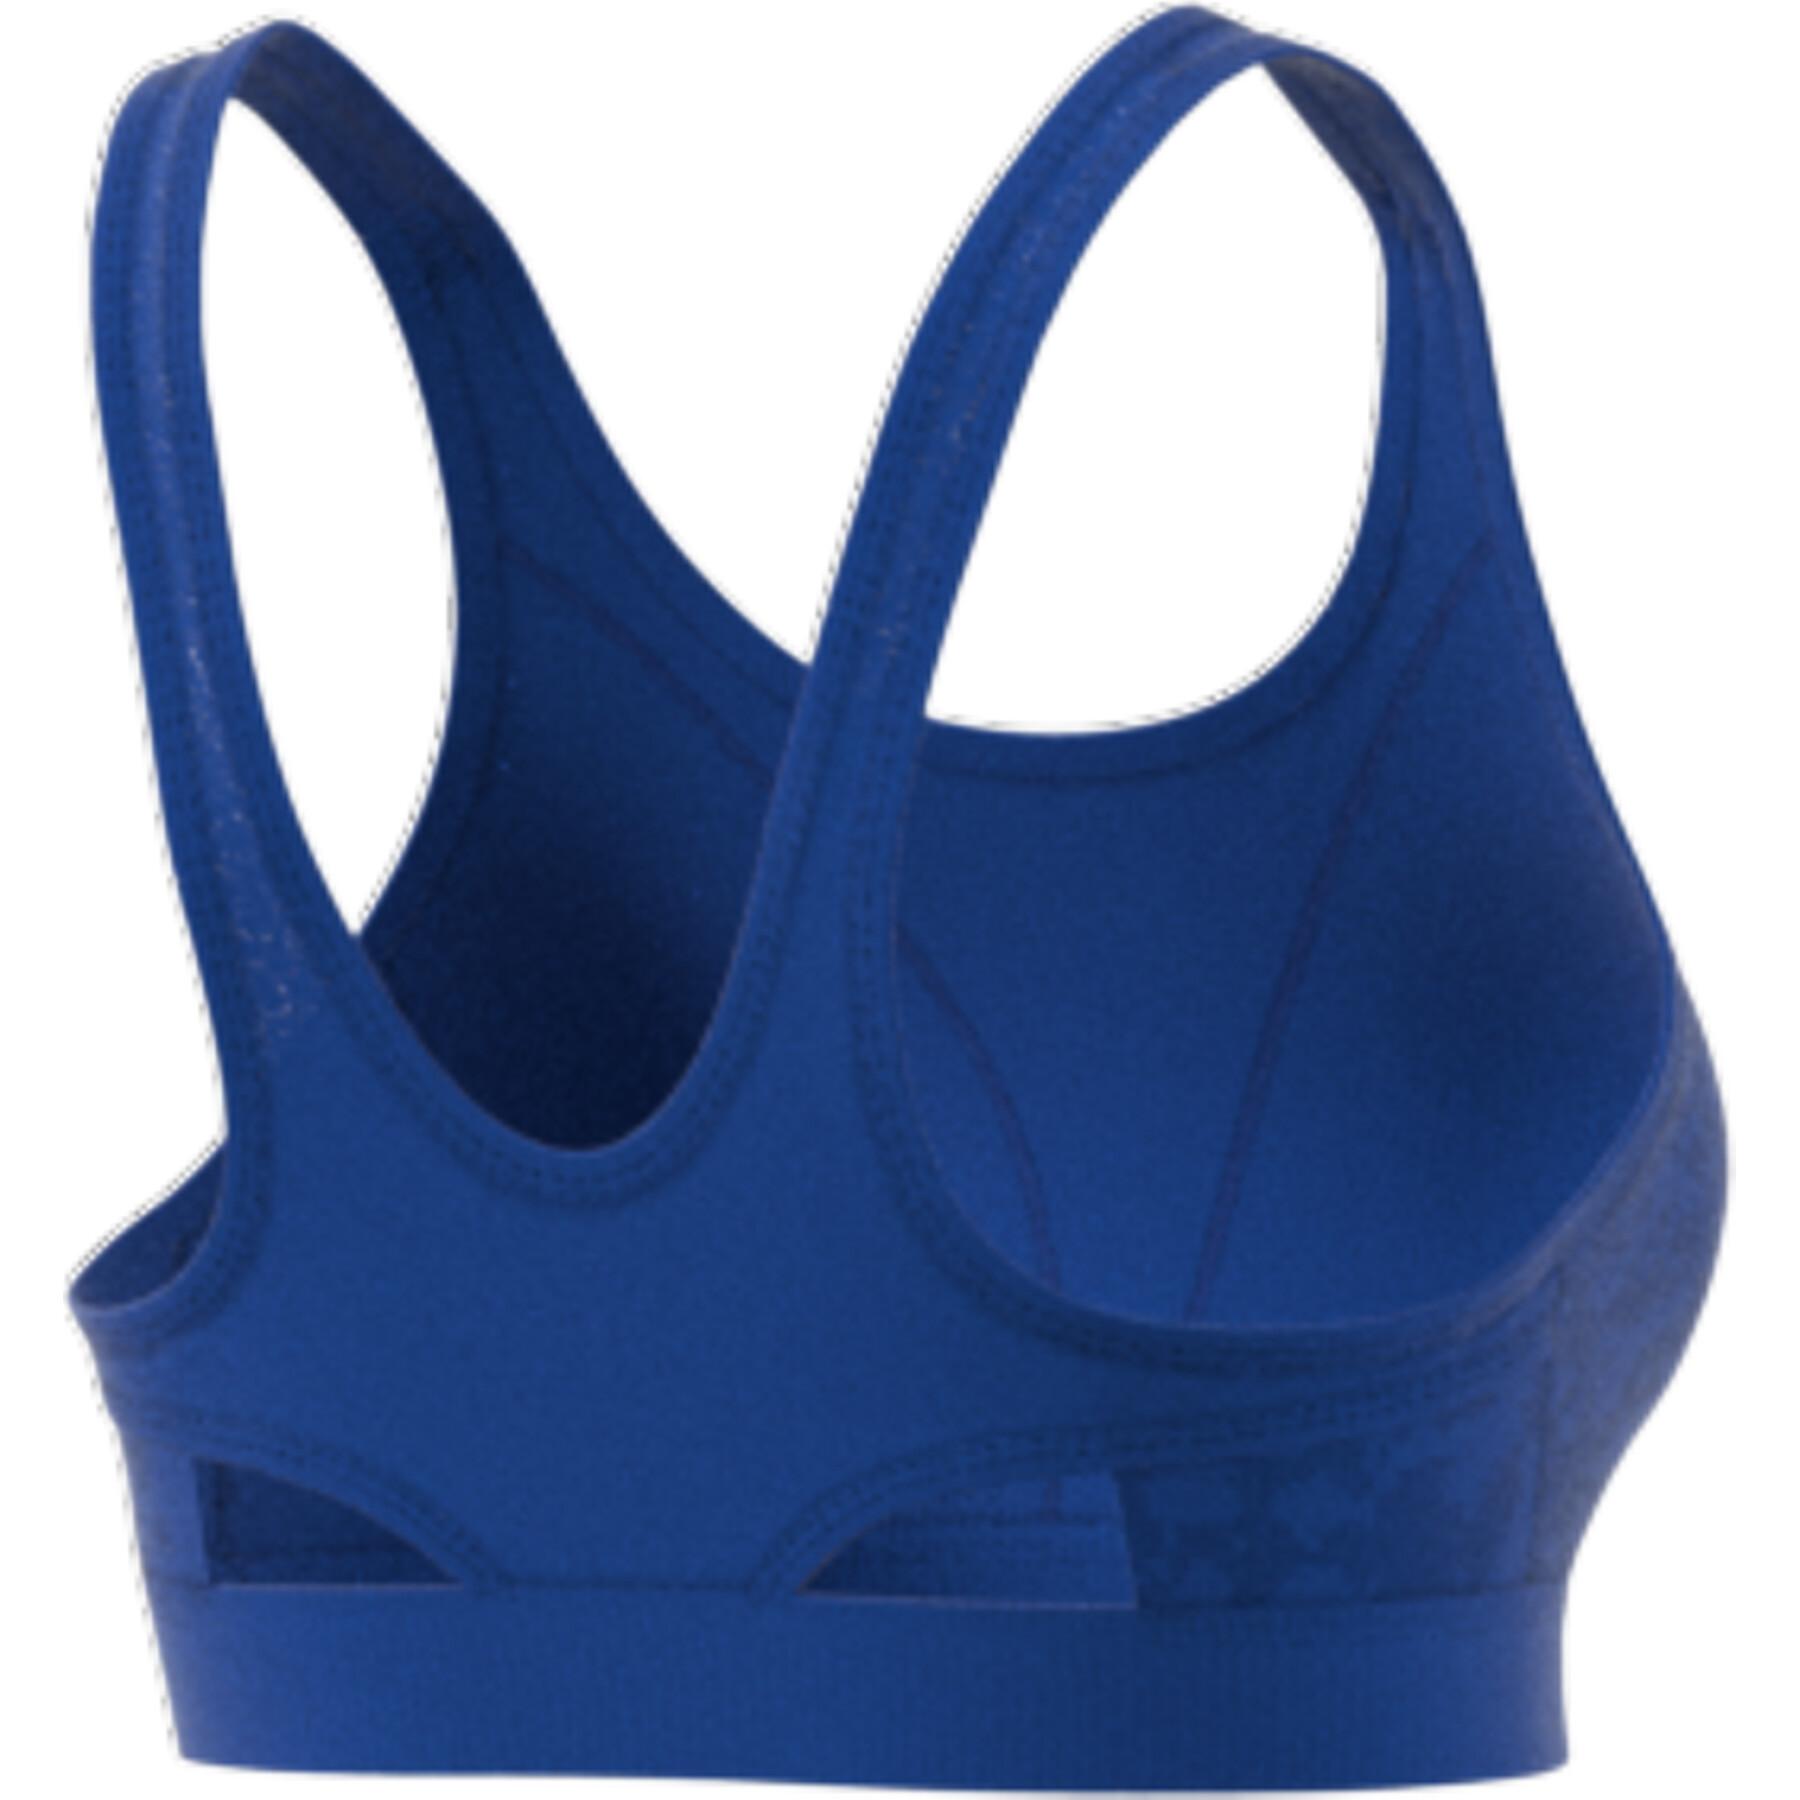 Women's bra adidas Believe This Medium-Support Lace Camo Workout